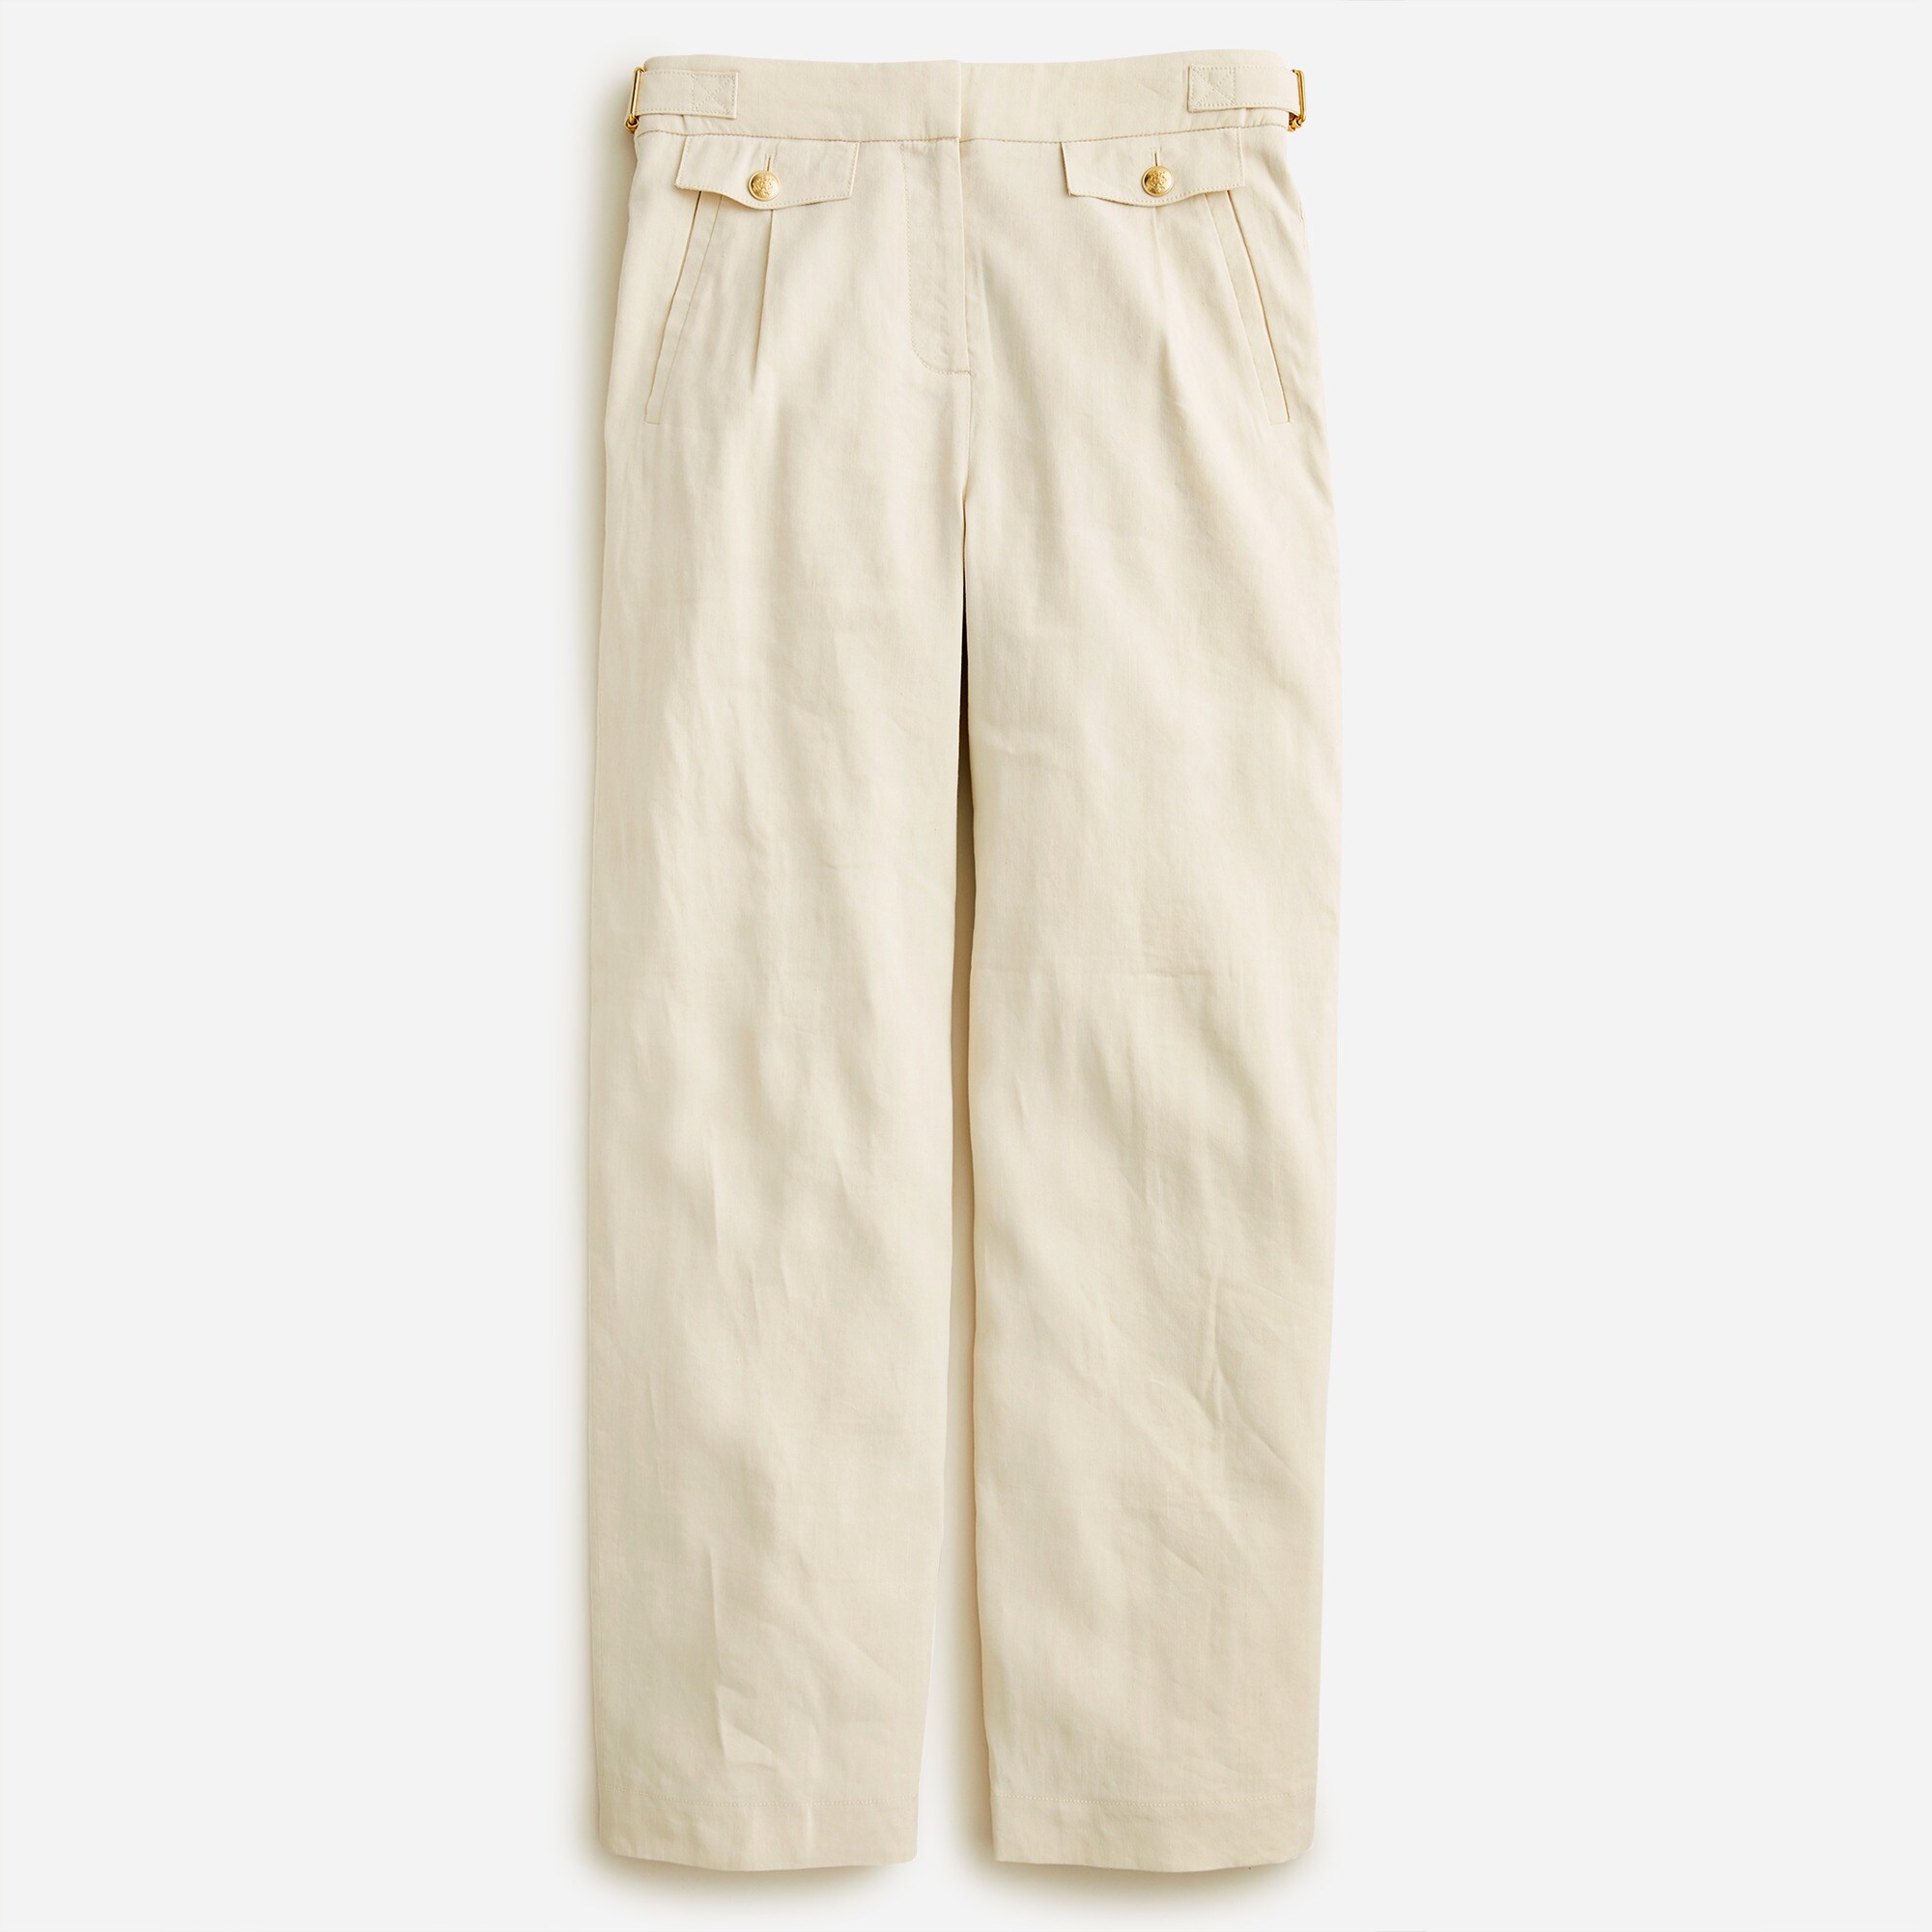  Collection side-tab trouser in Italian linen blend